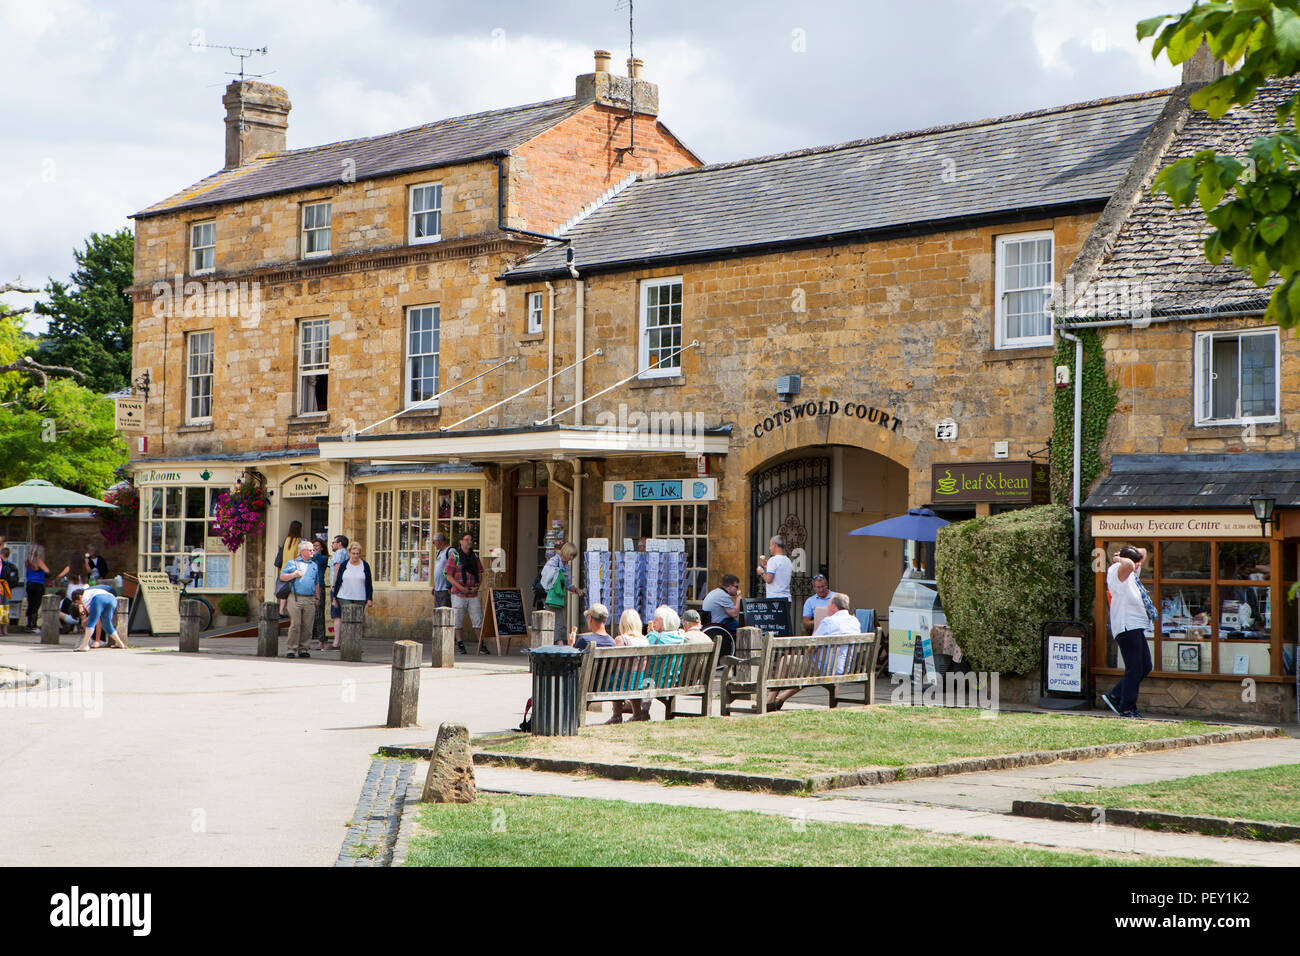 Broadway, UK - 8th August 2018: Broadway is a small town in the Cotswold district of Worcestershire,, England, this town is often referred to as the ' Stock Photo